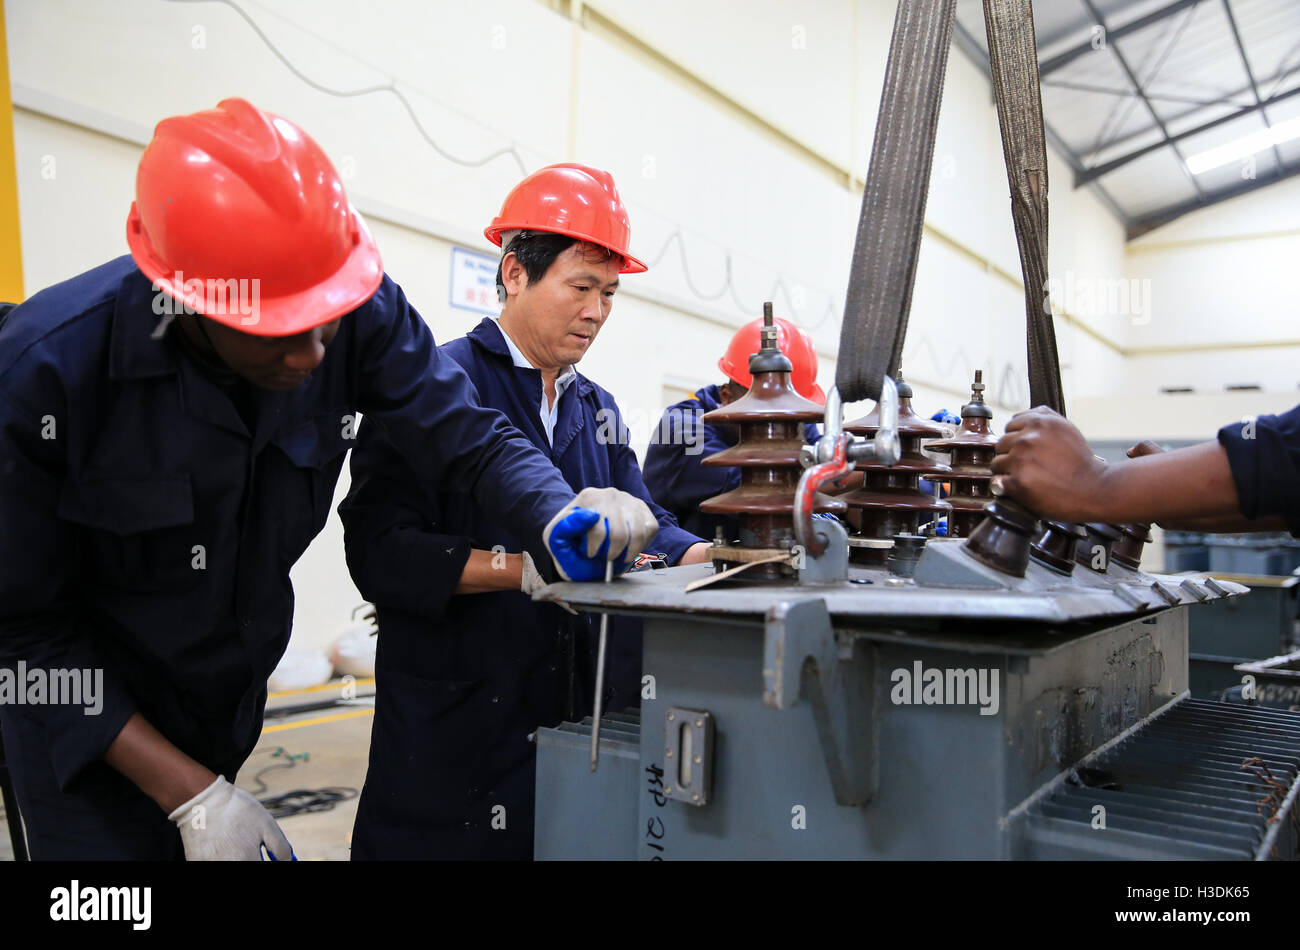 Nairobi, Kenya. 5th Oct, 2016. A Chinese engineer guides Kenyan technicians to work at Yocean manufacturing transformers factory on the outskirts of Nairobi, Kenya, on Oct. 5, 2016. Kenya's first transfomer-manufacturing plant, set up by Chinese company Yocean Group, opened on Wednesday. Kenya has been relying on transformers from abroad, mostly from India. Kenya's Cabinet Secretary for Energy and Petroleum, Charles Keter, said the plant will ease procurement of transformers and other electrical appliances. © Pan Siwei/Xinhua/Alamy Live News Stock Photo